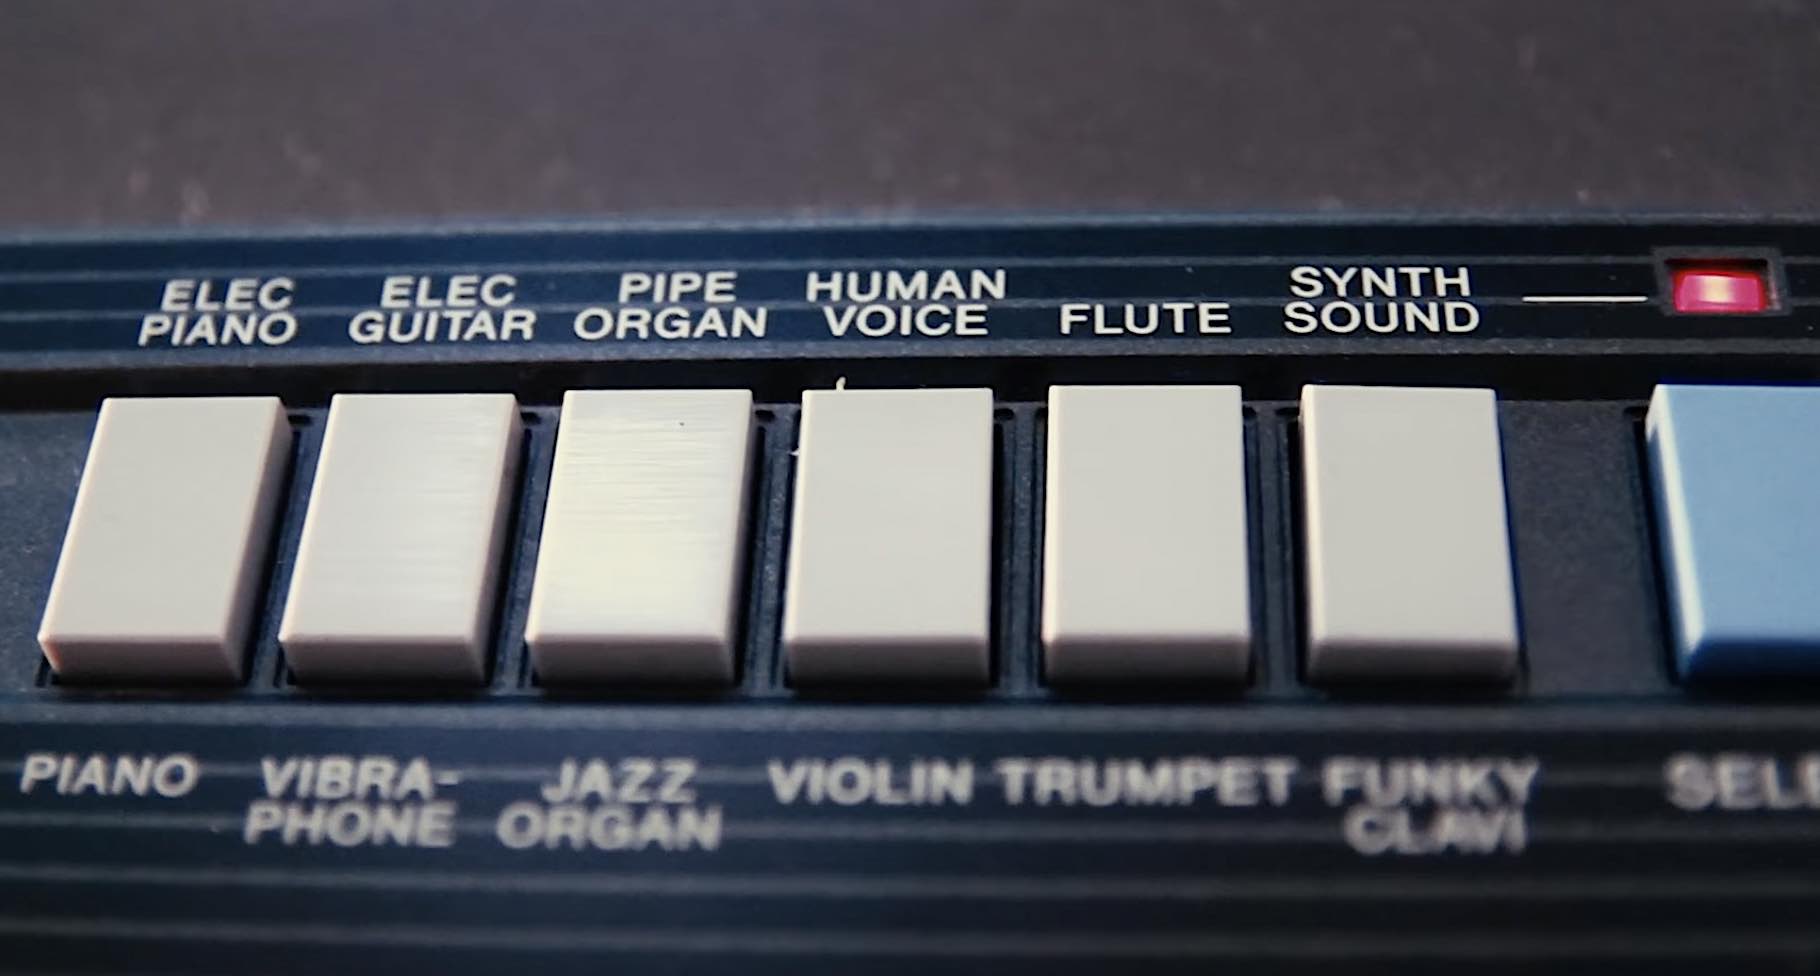 Close-up of sound selection buttons on a Concertmate 660 keyboard, including flute, synth sound, and human voice presets